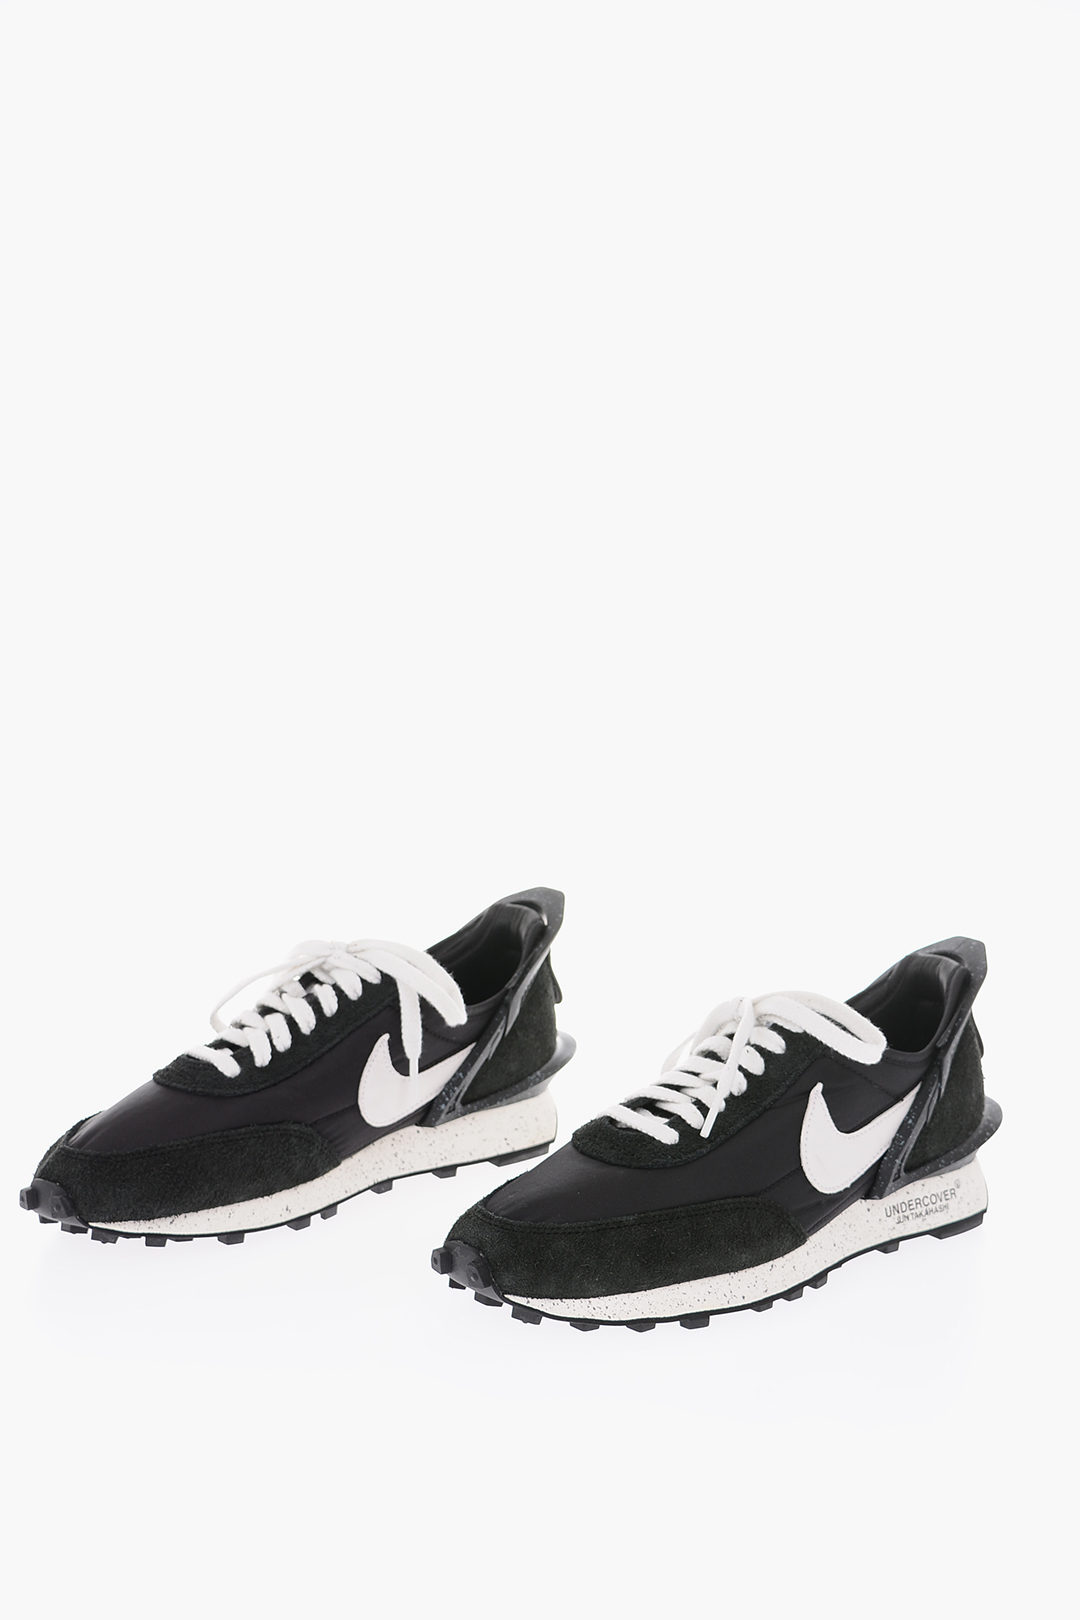 UNDERCOVER JUN TAKAHASHI leather NIKE DBREAK Sneakers With Paint Details